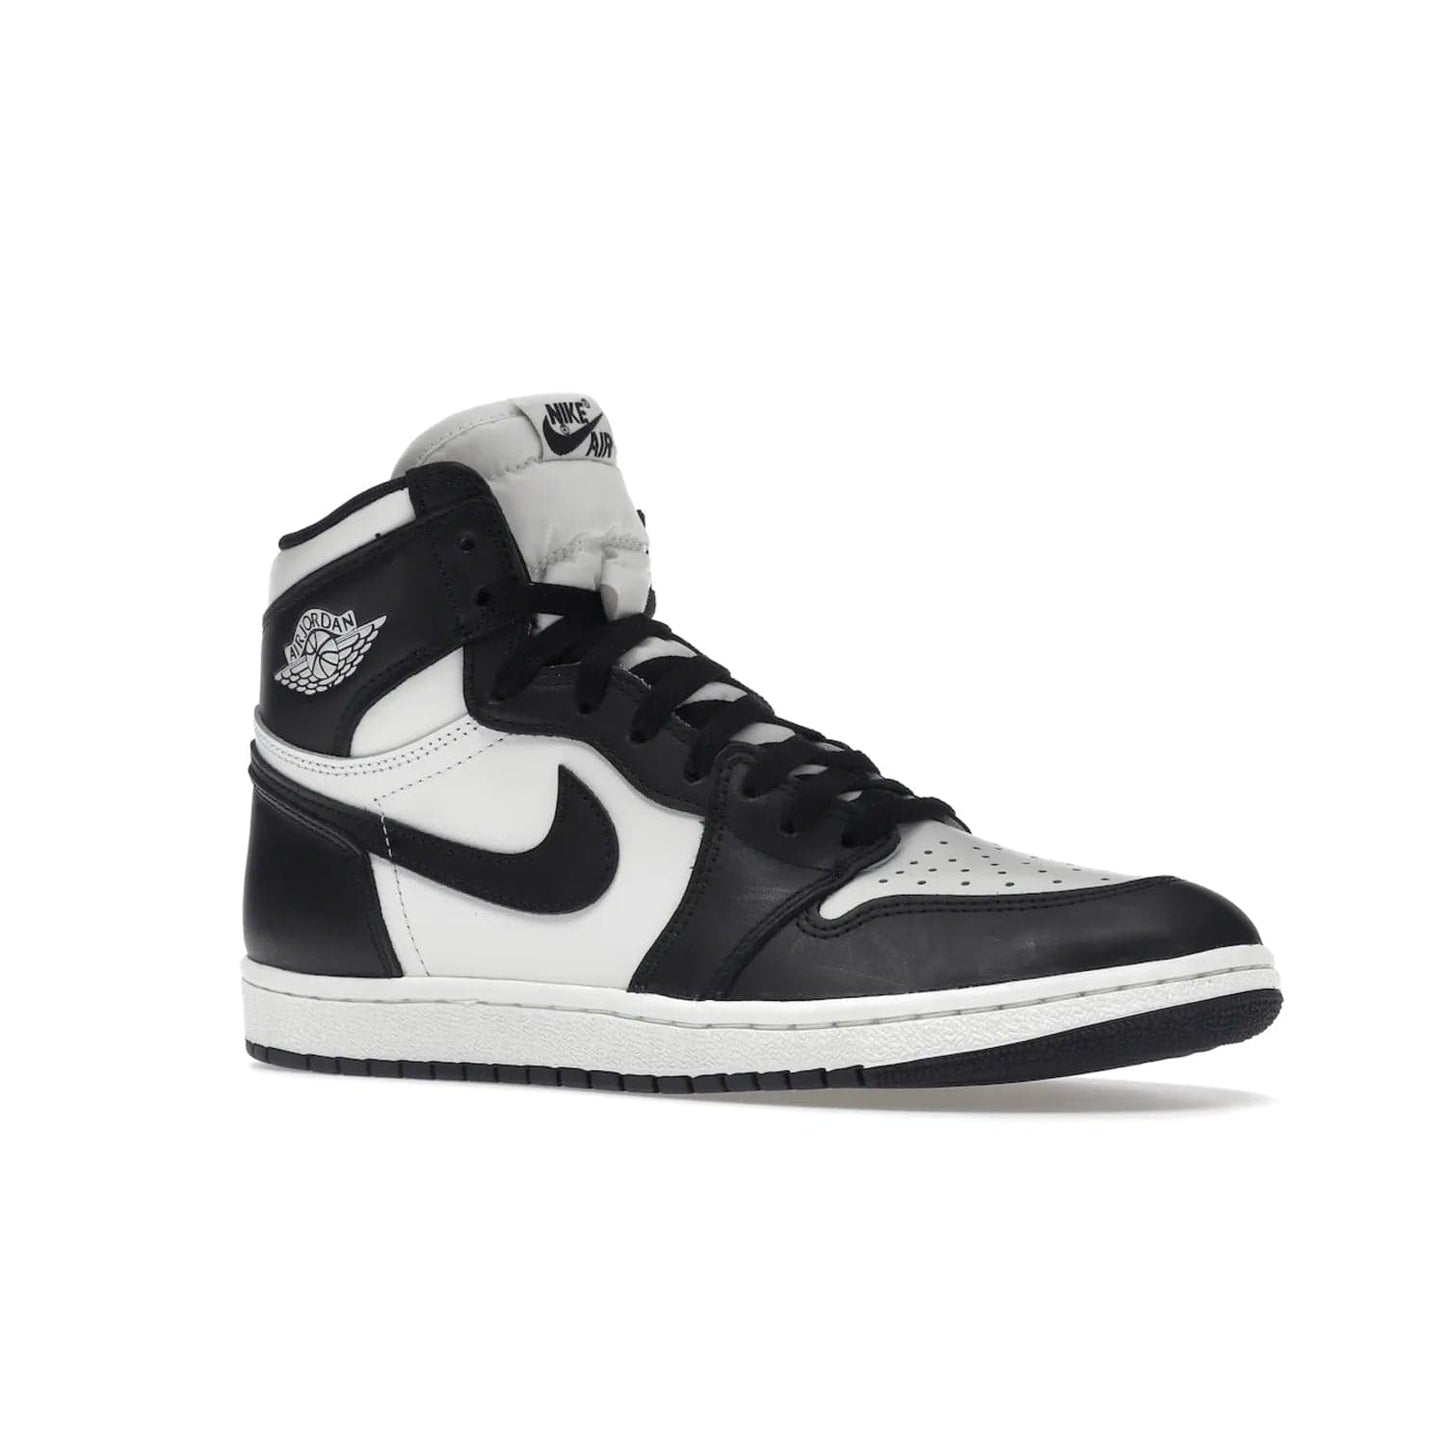 Jordan 1 Retro High 85 Black White (2023) - Image 4 - Only at www.BallersClubKickz.com - Brand new Jordan 1 Retro High 85 Black White (2023) now available. A classic color scheme of black and white leather uppers with signature Nike Air logo on the tongue. Must-have for any Air Jordan fan. Available February 15, 2023.